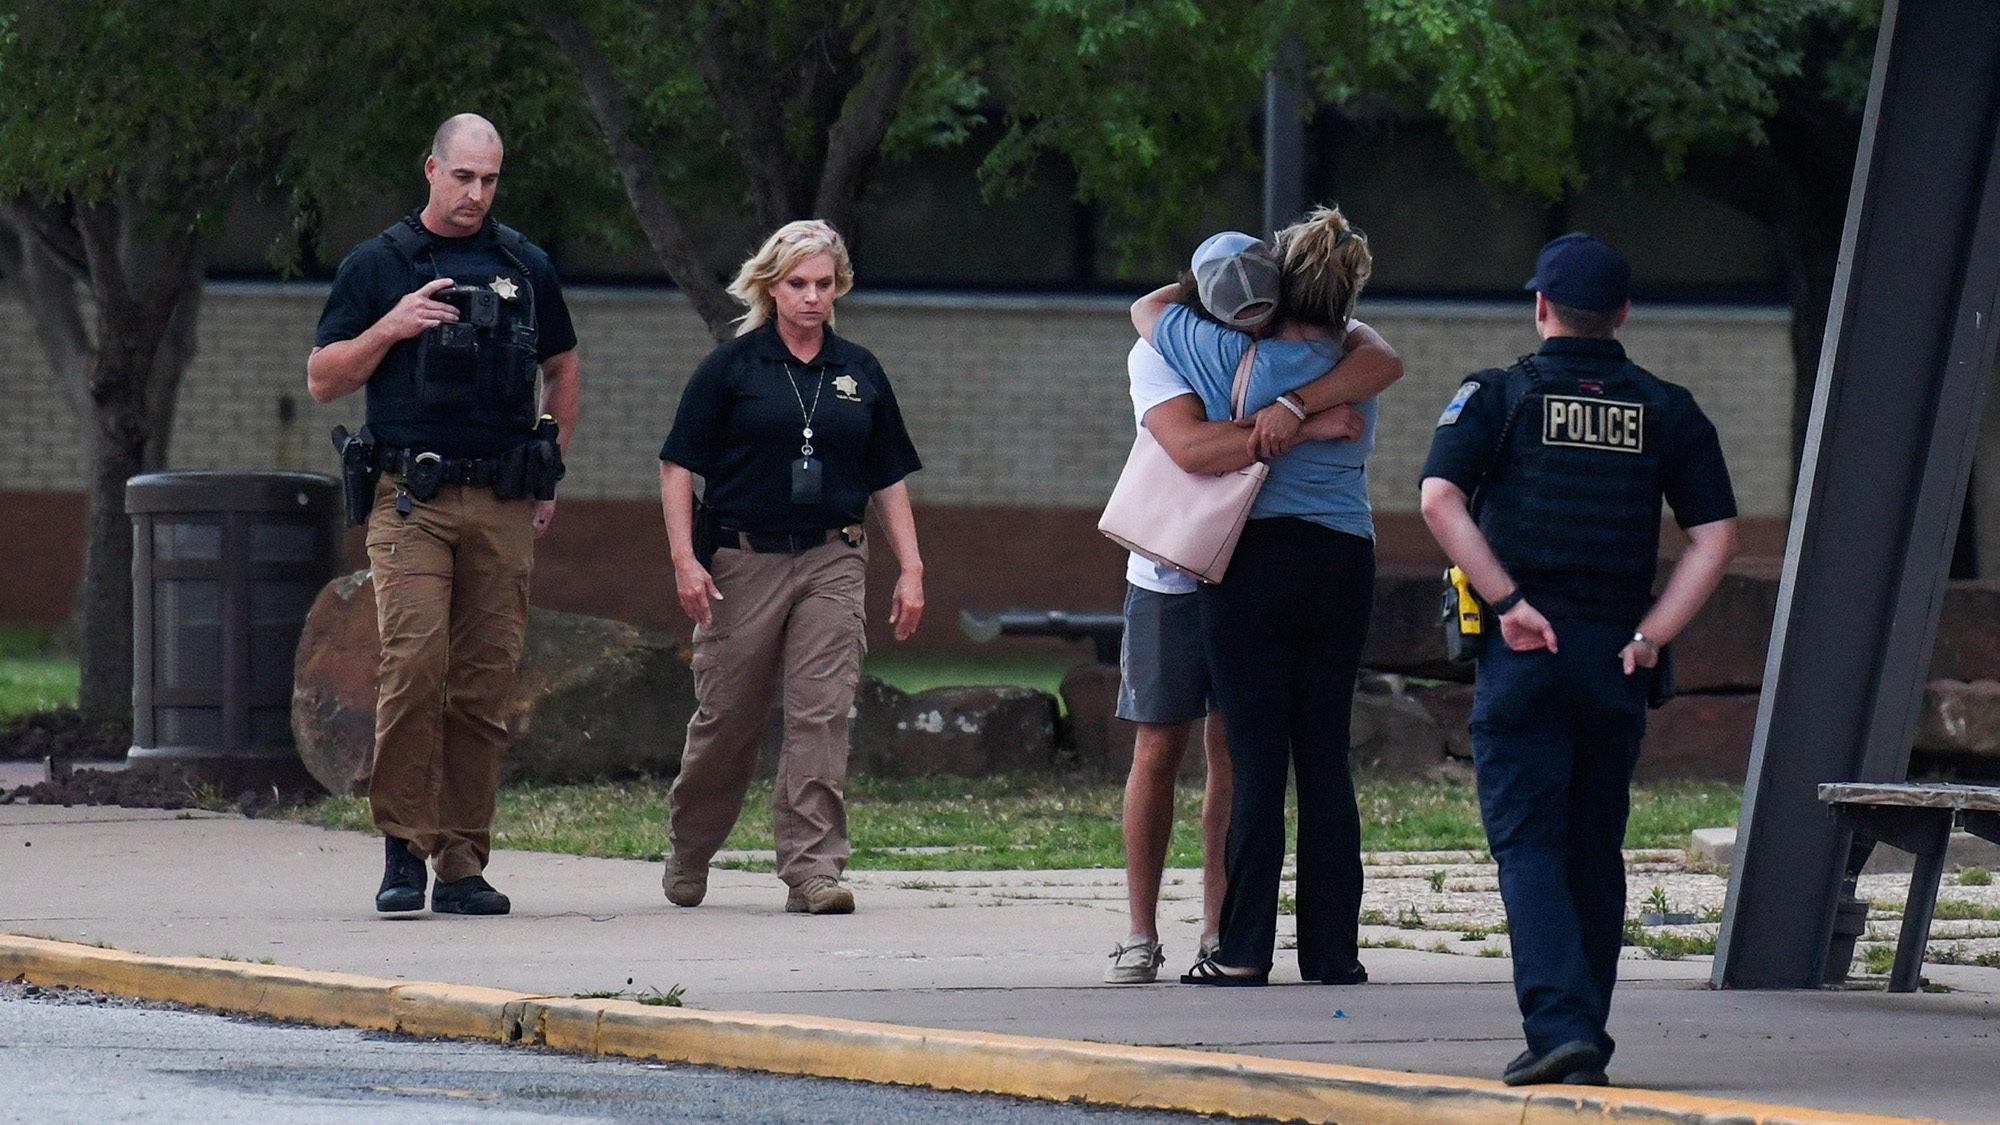 People embrace near the reunion location at Memorial High School following a shooting at Saint Francis hospital campus, in Tulsa, Oklahoma on June 1.